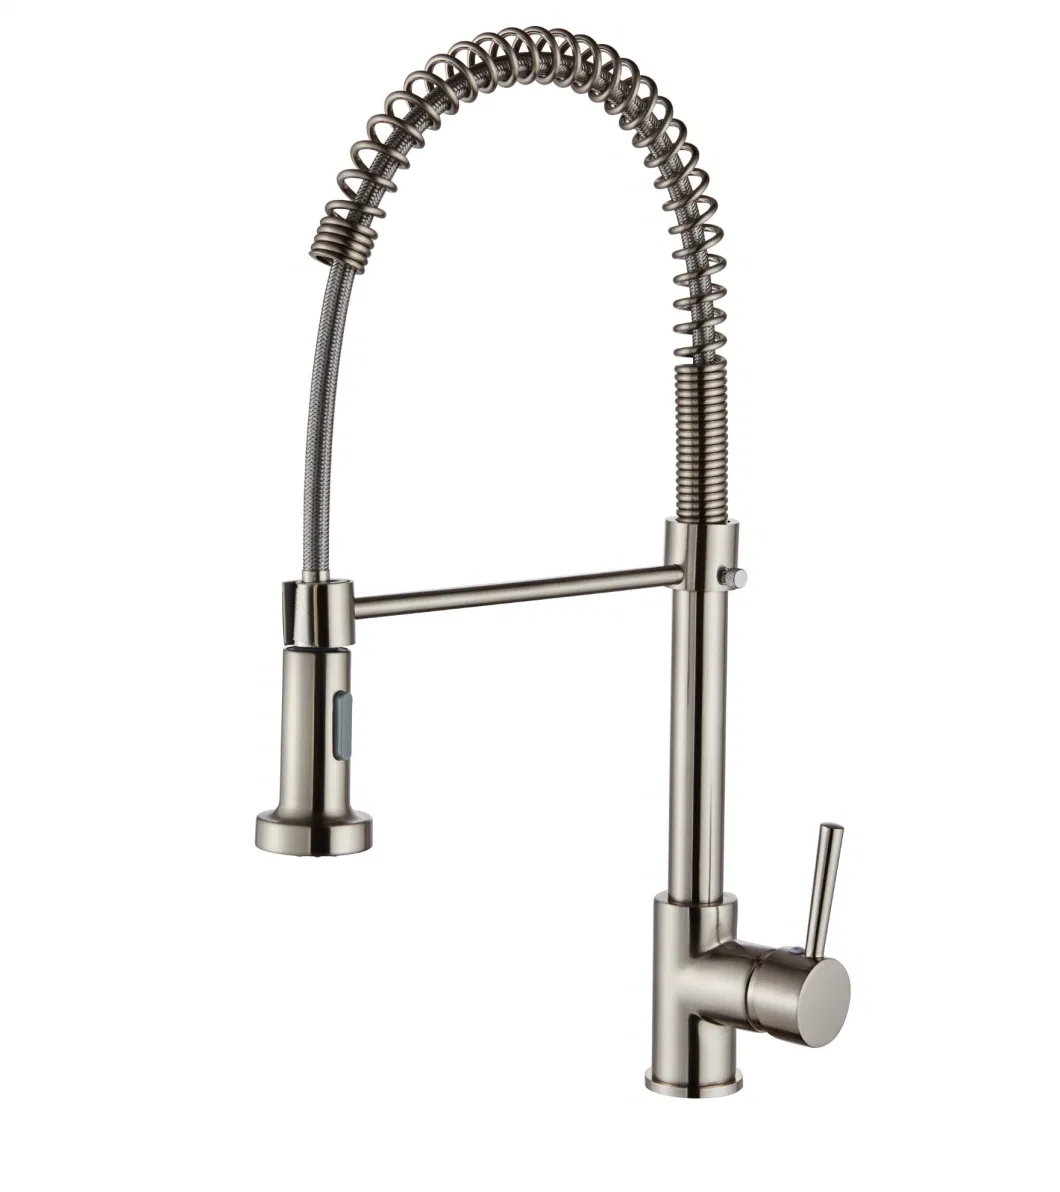 New Design Kitchen Faucet Bibcock with Pull Down Sprayer Odn-39